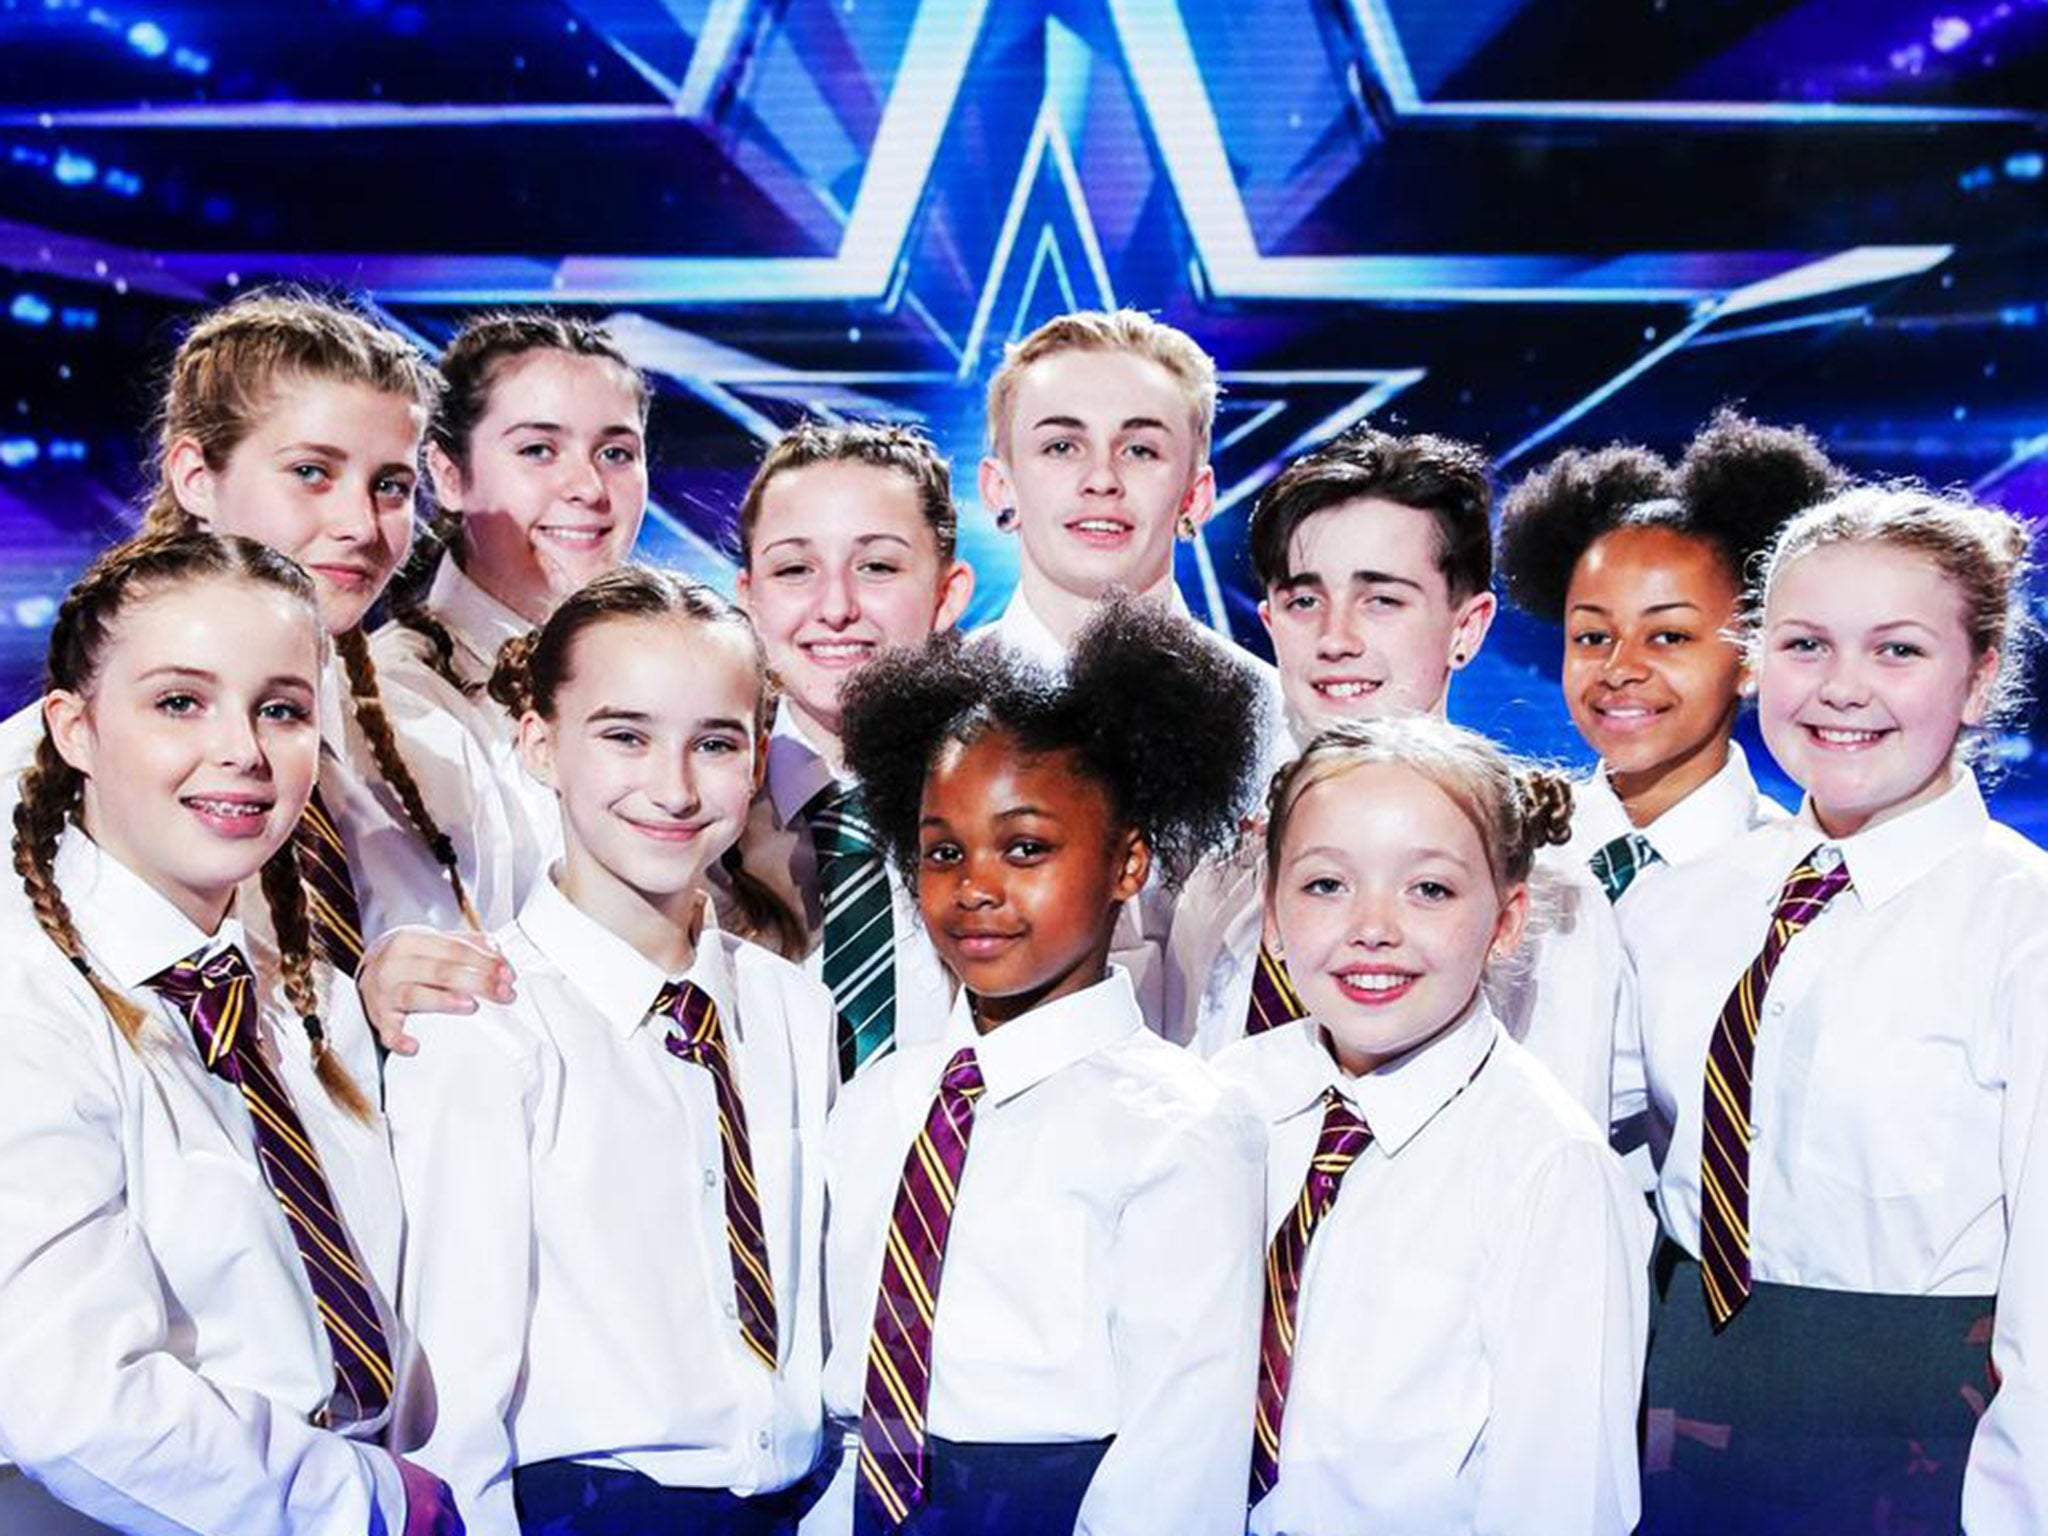 Entity Allstars made it through to the Britain's Got Talent final